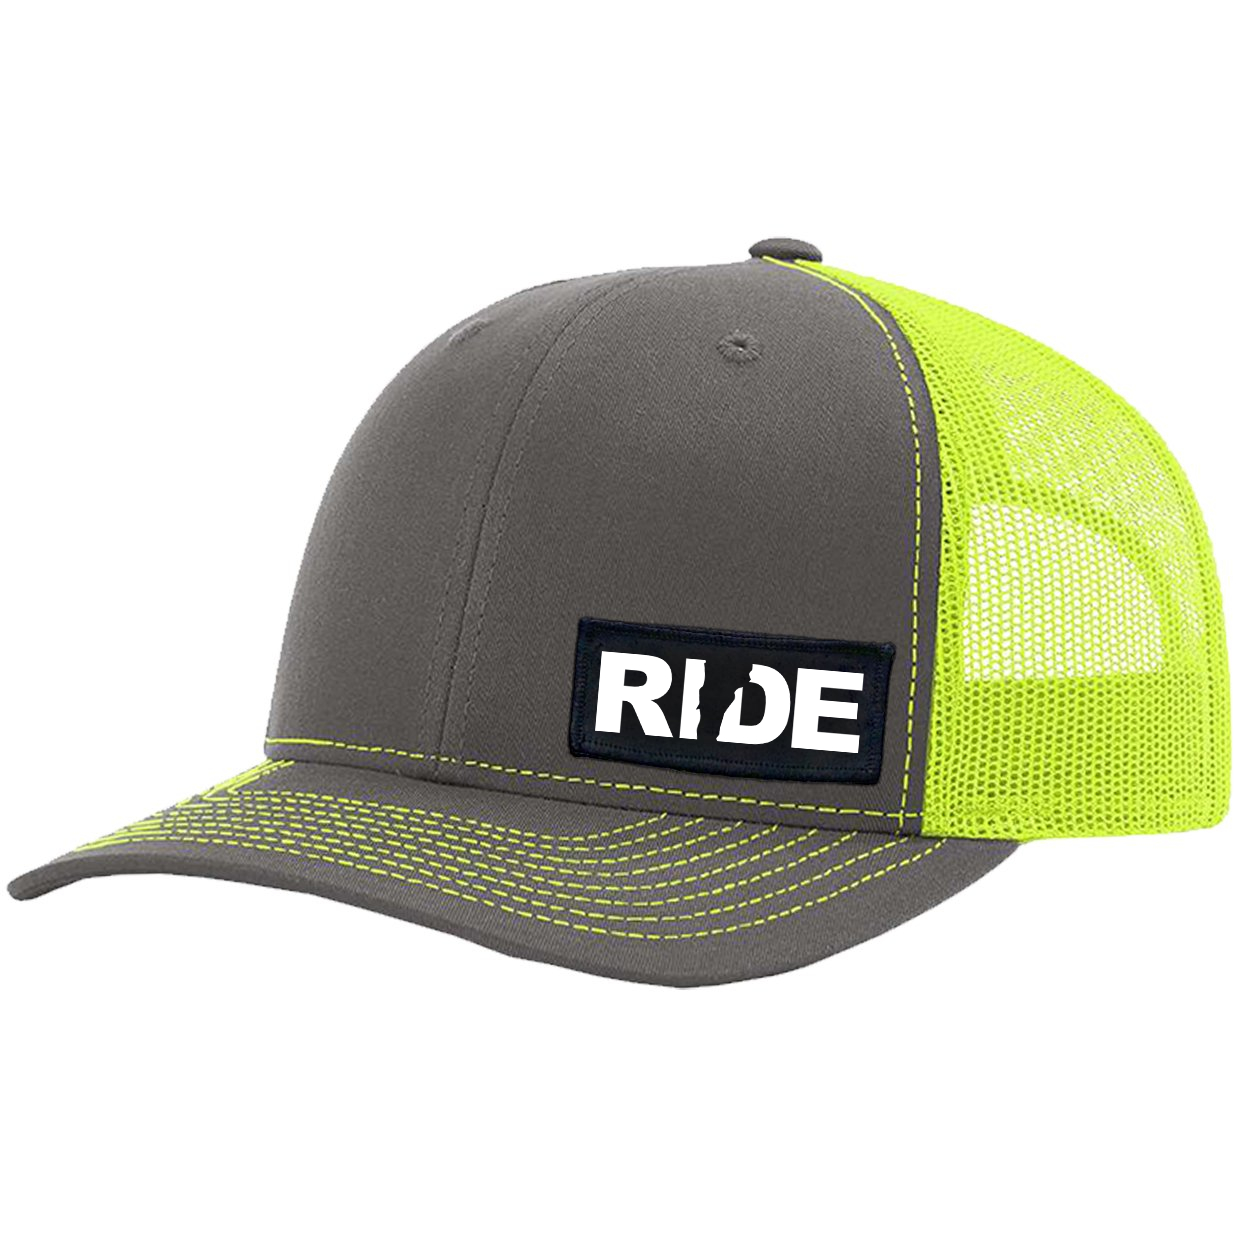 Ride Vermont Night Out Woven Patch Snapback Trucker Hat Charcoal/Neon Yellow (White Logo)